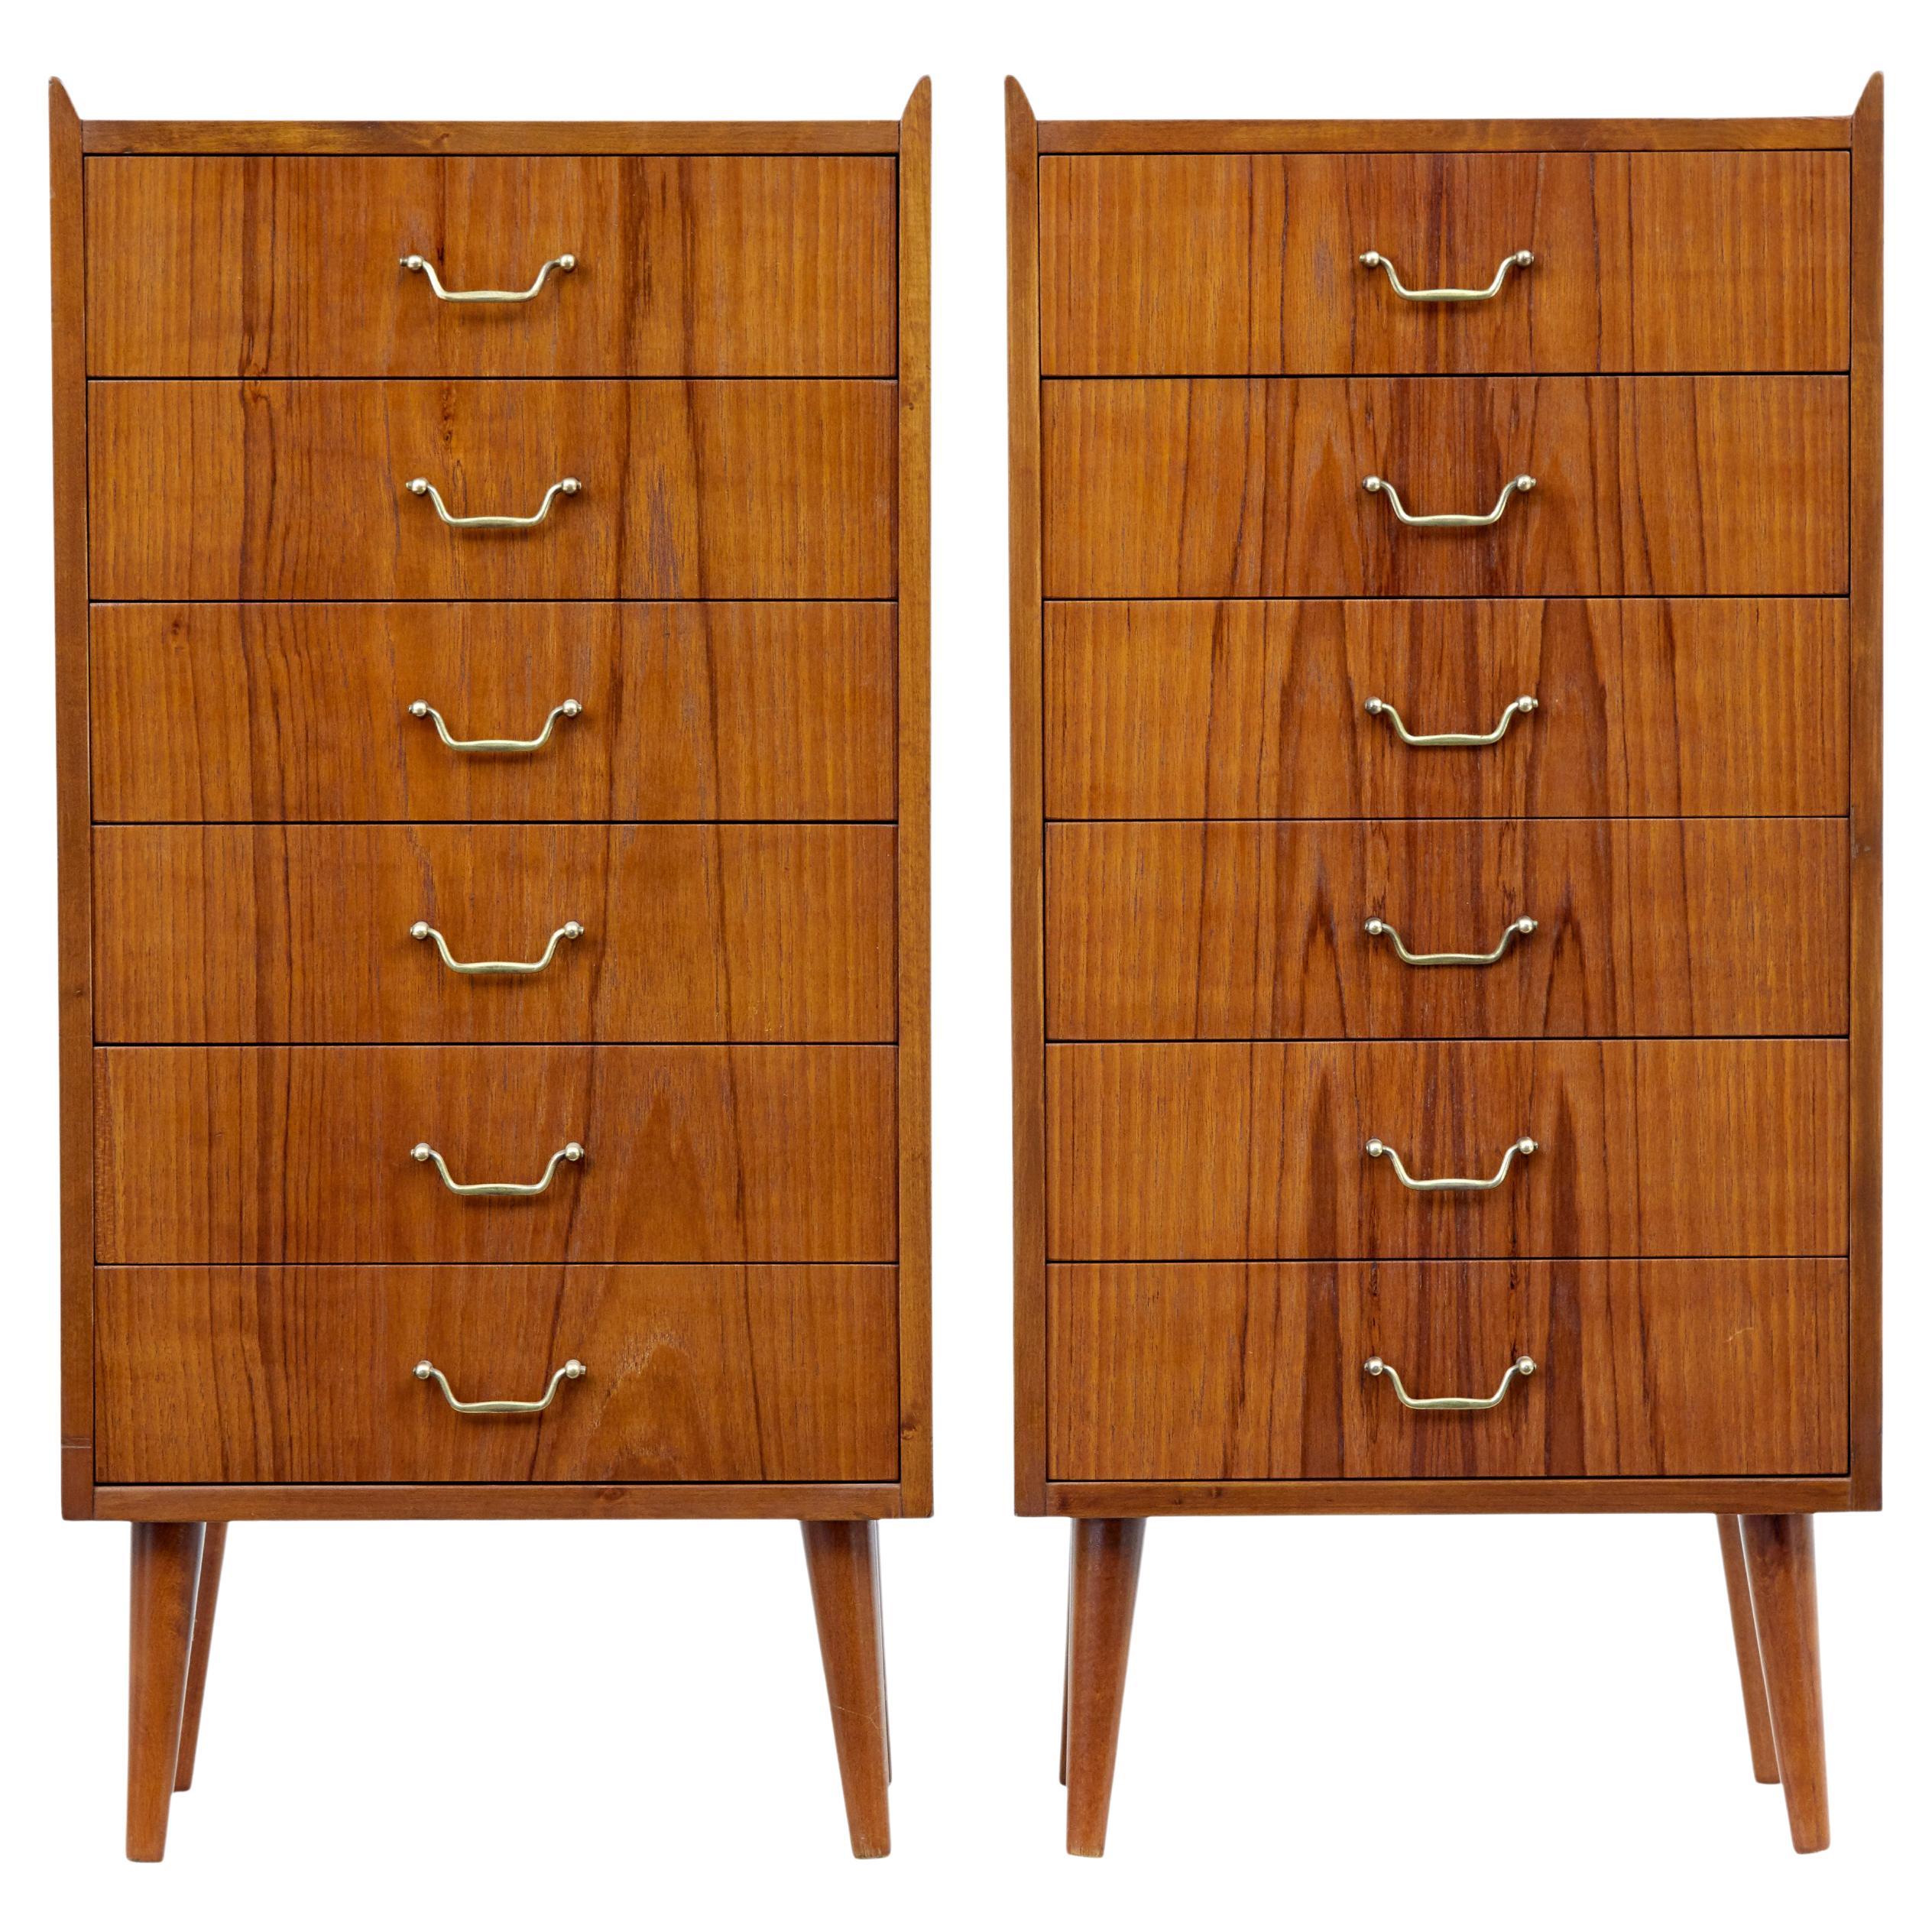 Pair of Mid-20th Century Scandinavian Teak Chest of Drawers For Sale